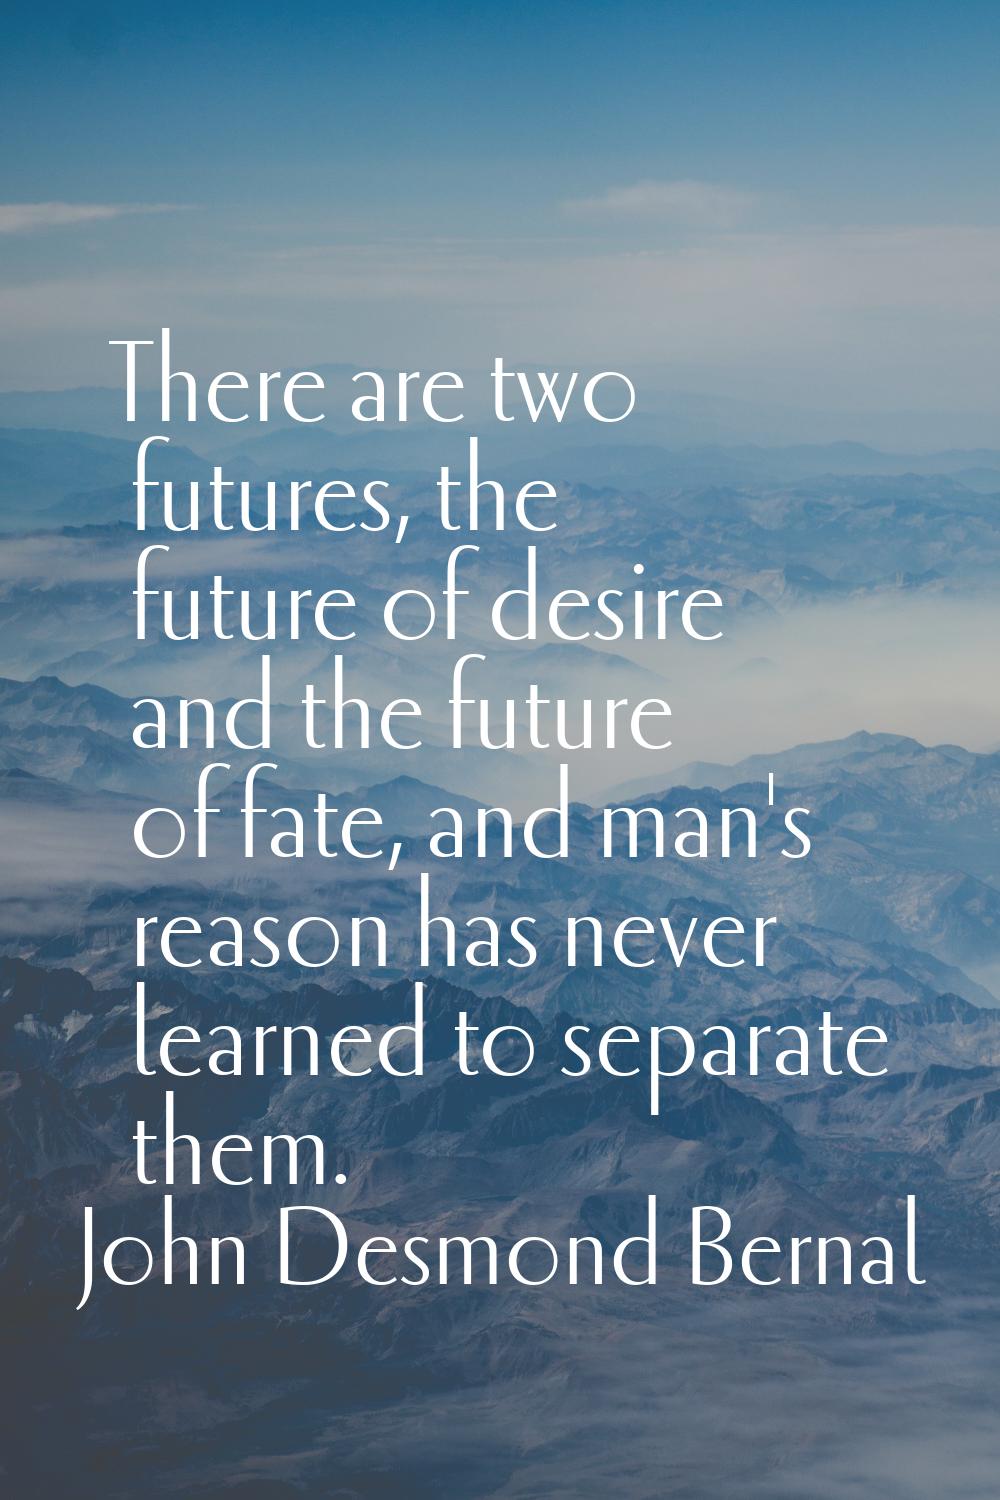 There are two futures, the future of desire and the future of fate, and man's reason has never lear